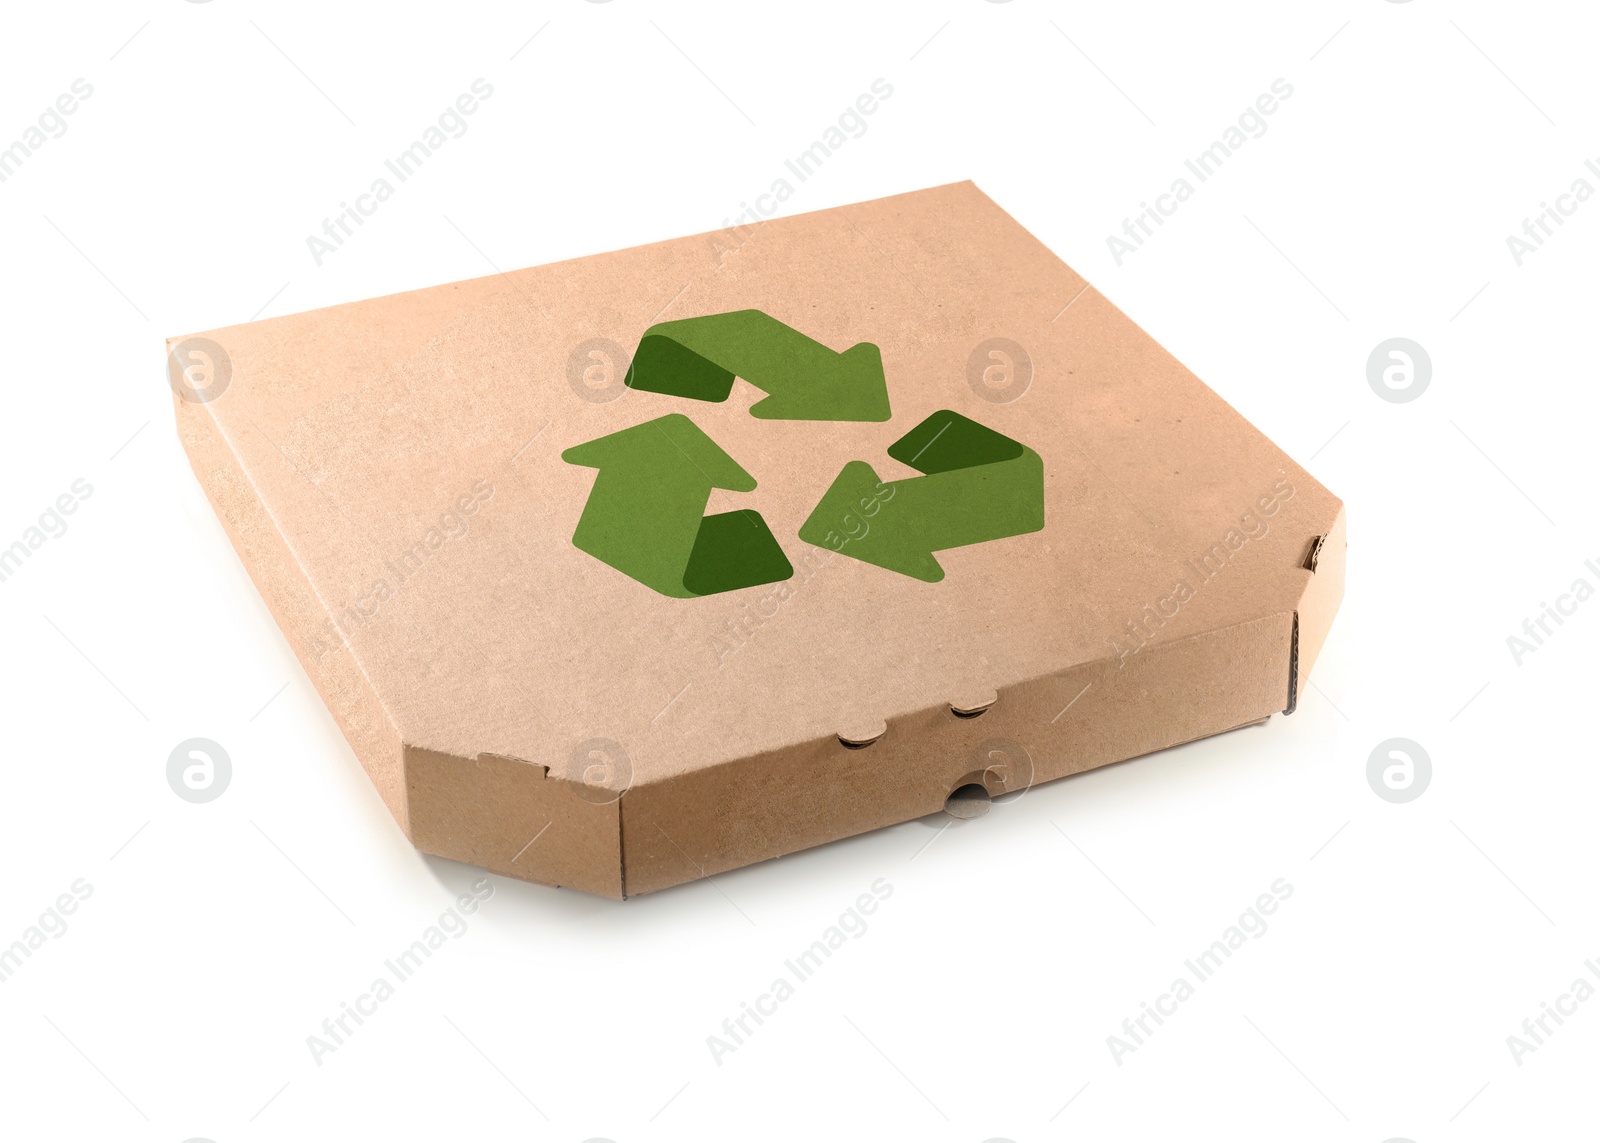 Image of Cardboard pizza box with recycling symbol on white background 